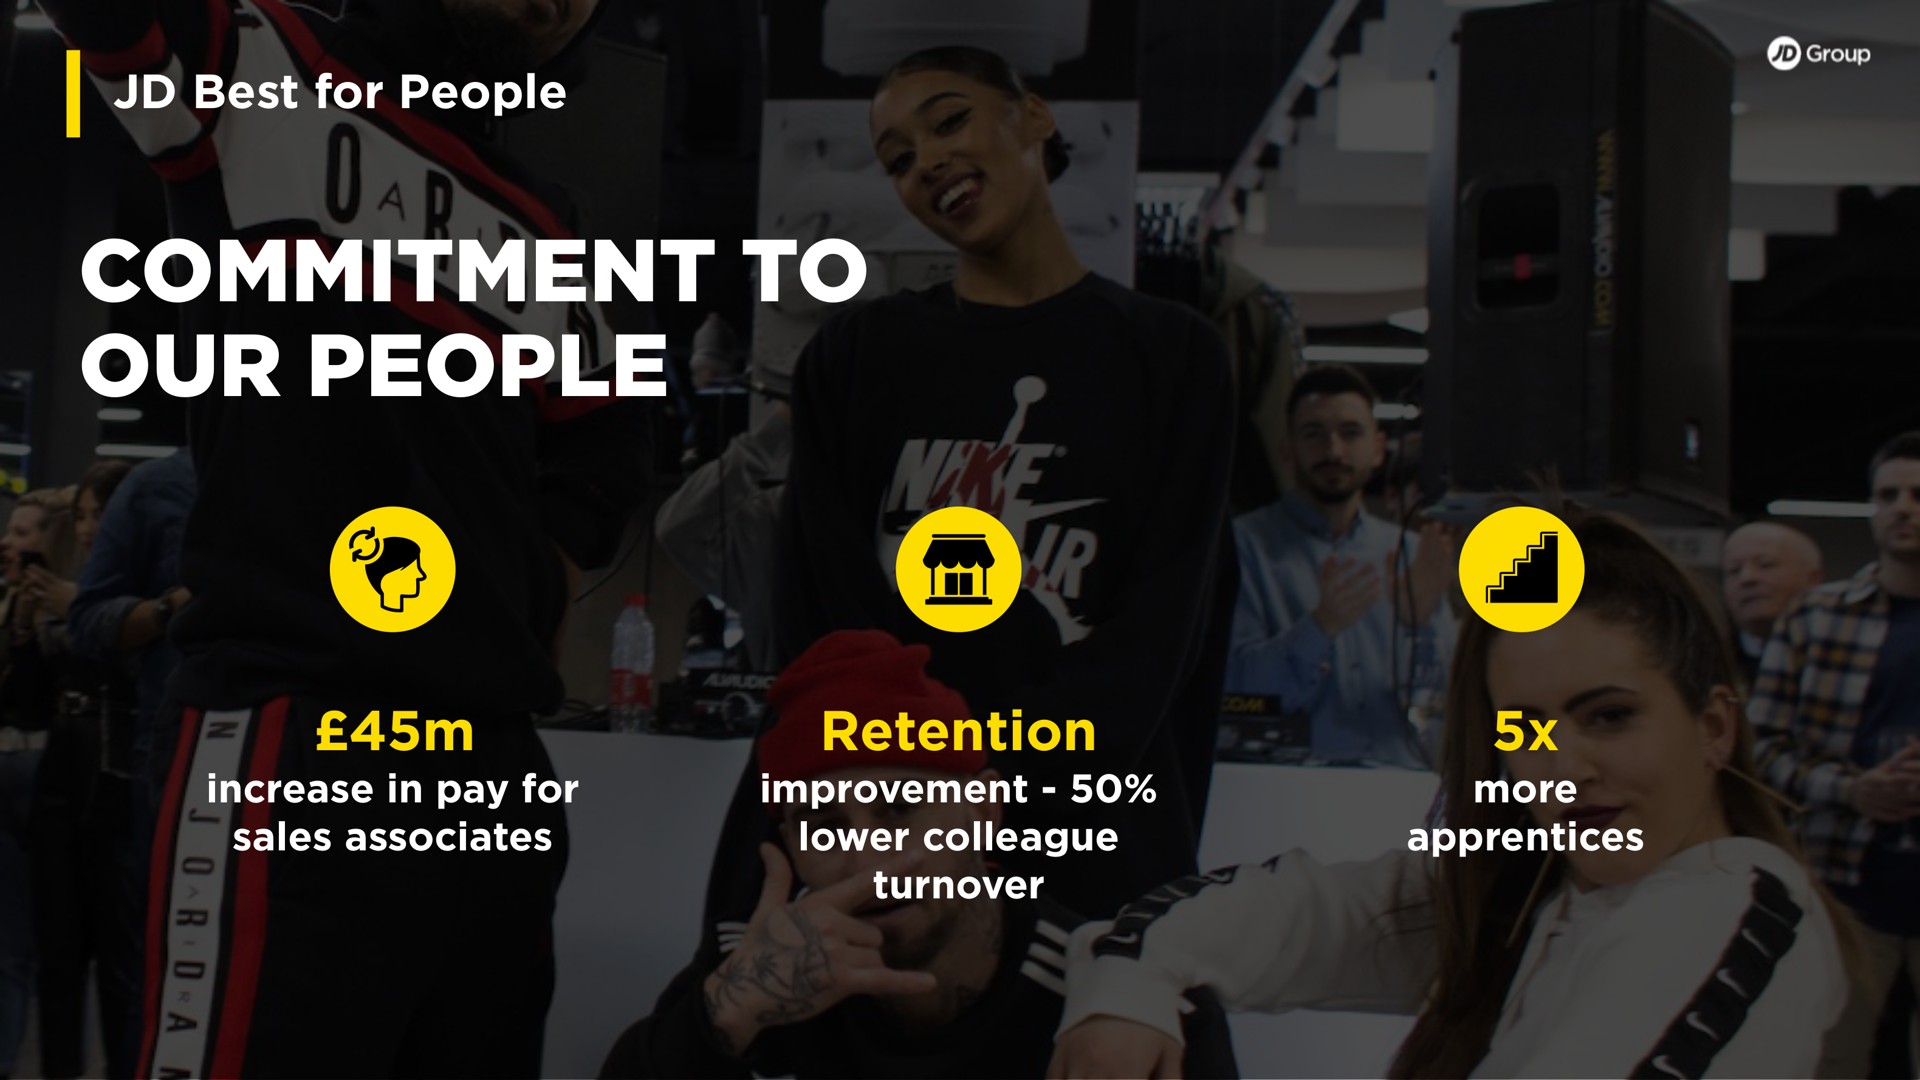 best for people commitment to our people increase in pay for sales associates retention improvement lower colleague turnover more apprentices | JD Sports